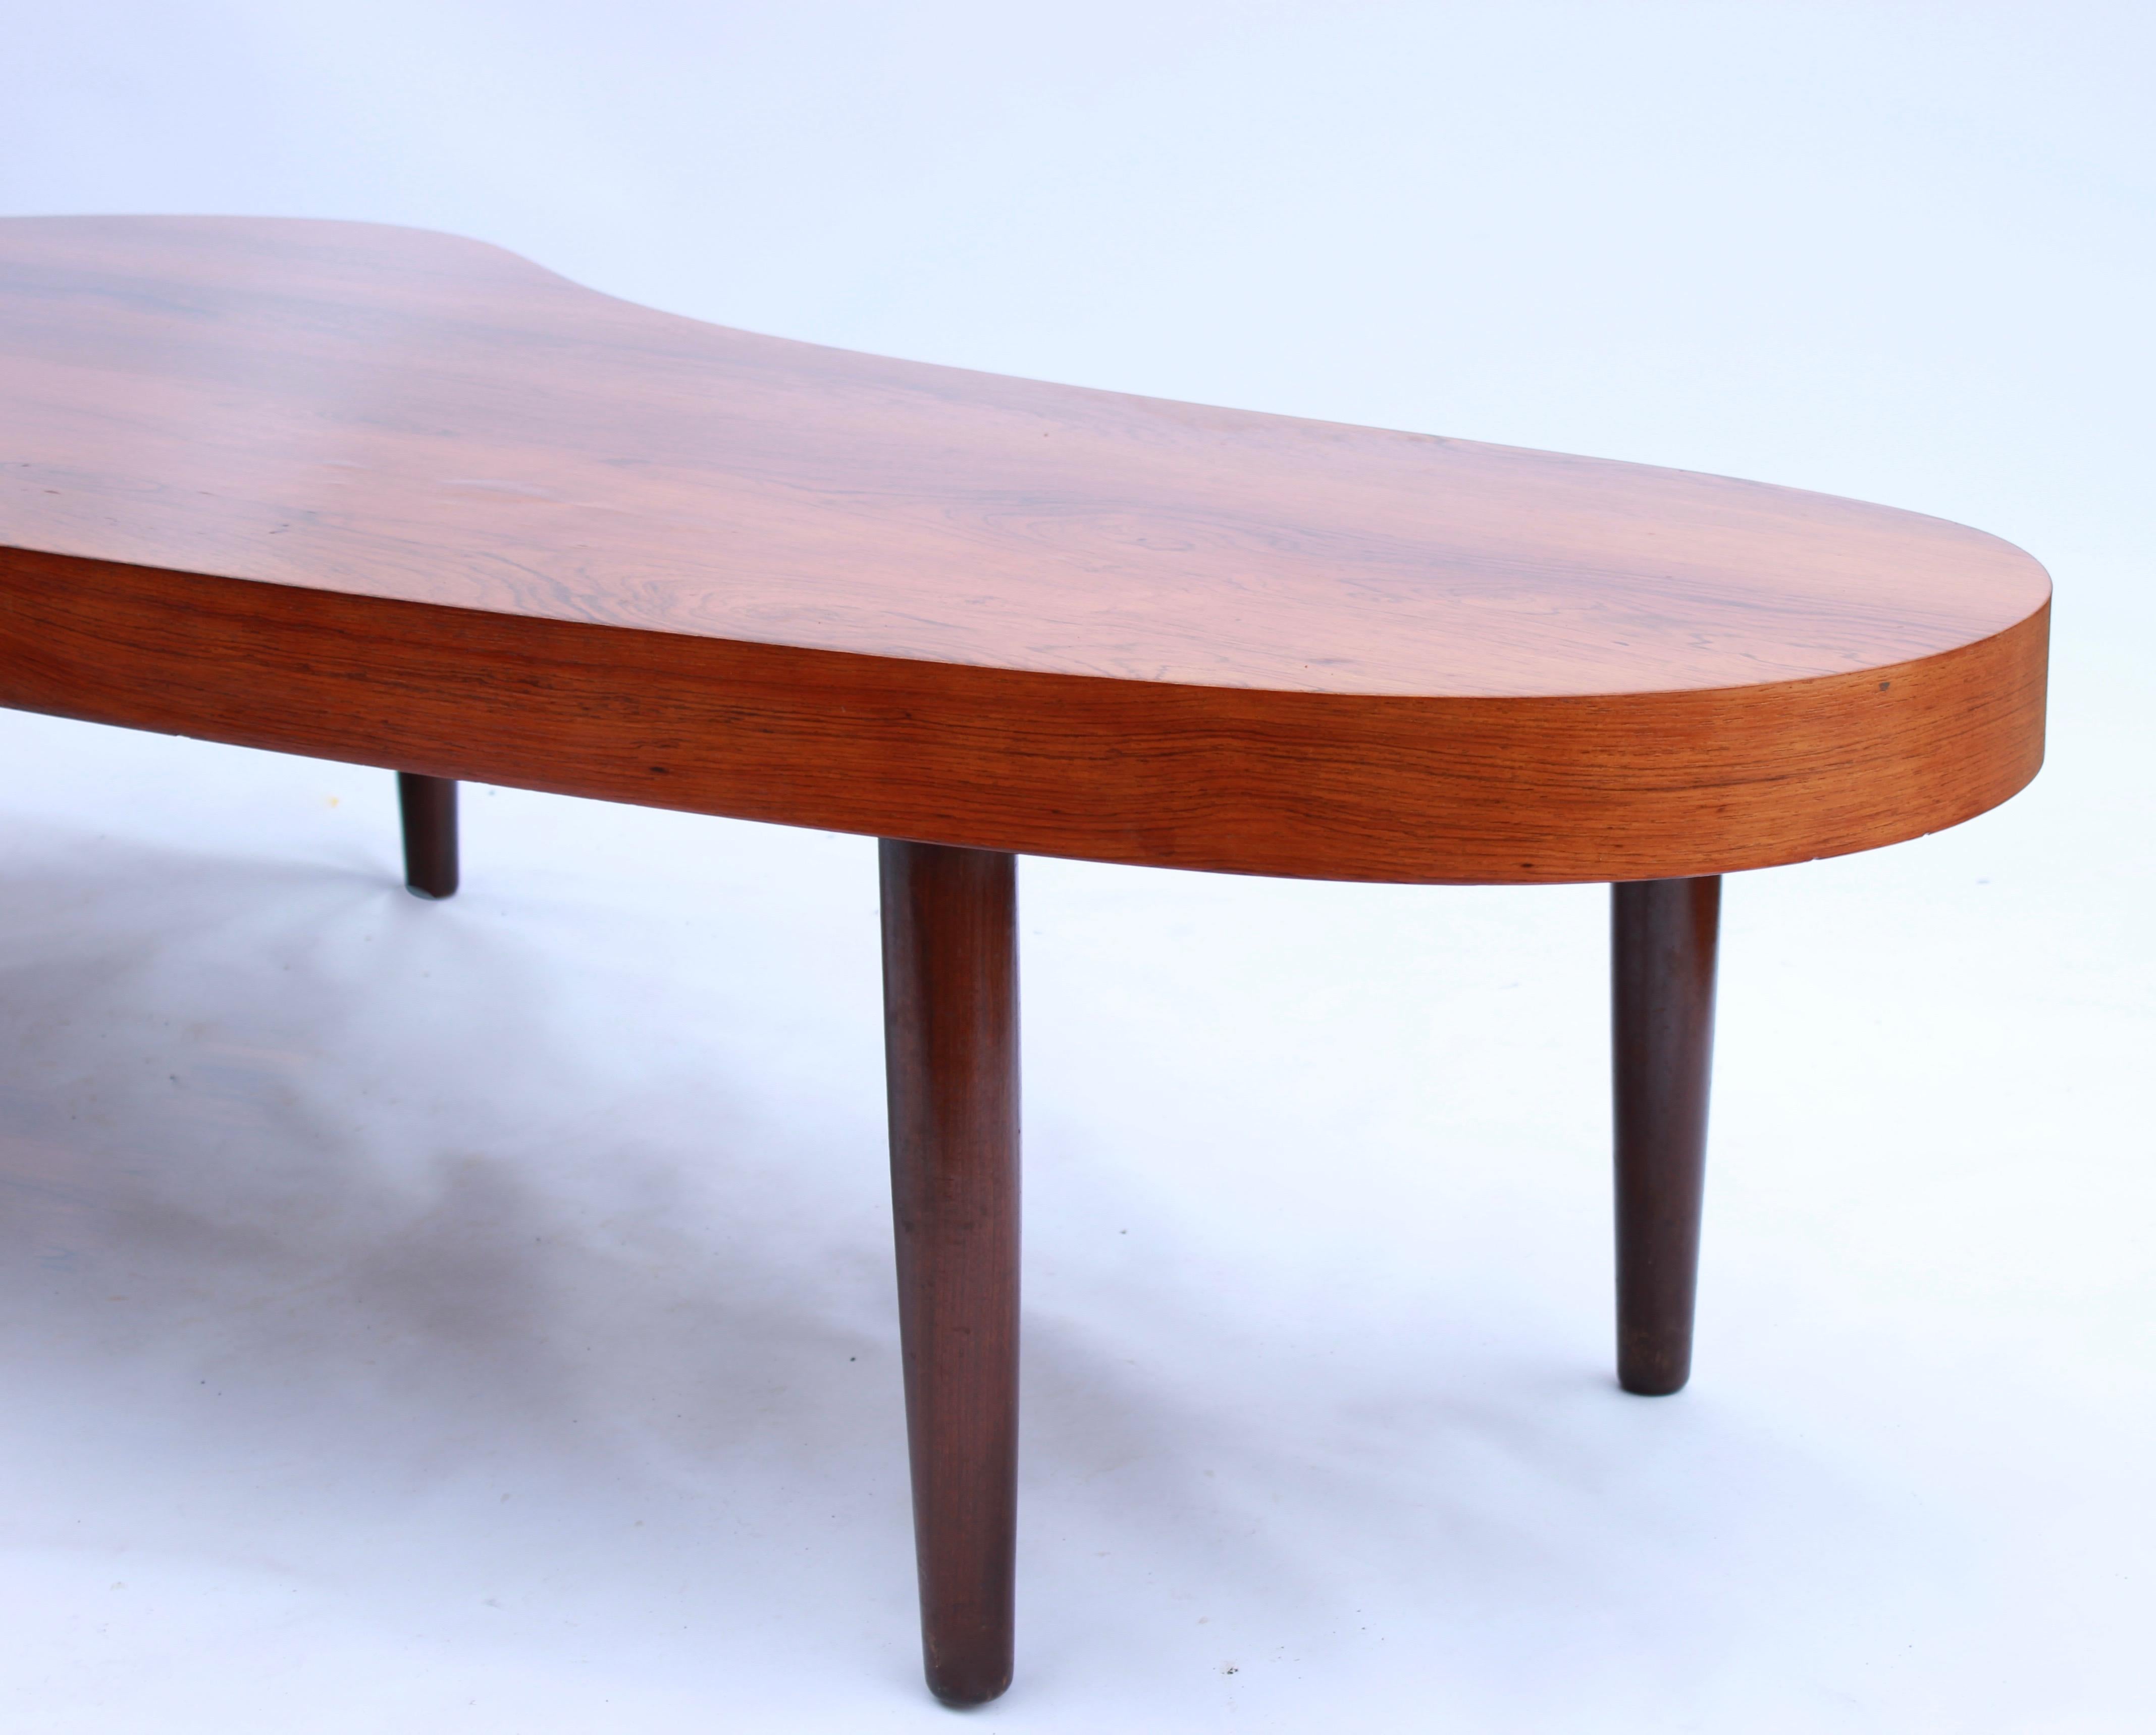 Mid-20th Century Coffee Table in Rosewood of Danish Design and Danish Cabinetmaker from the 1960s